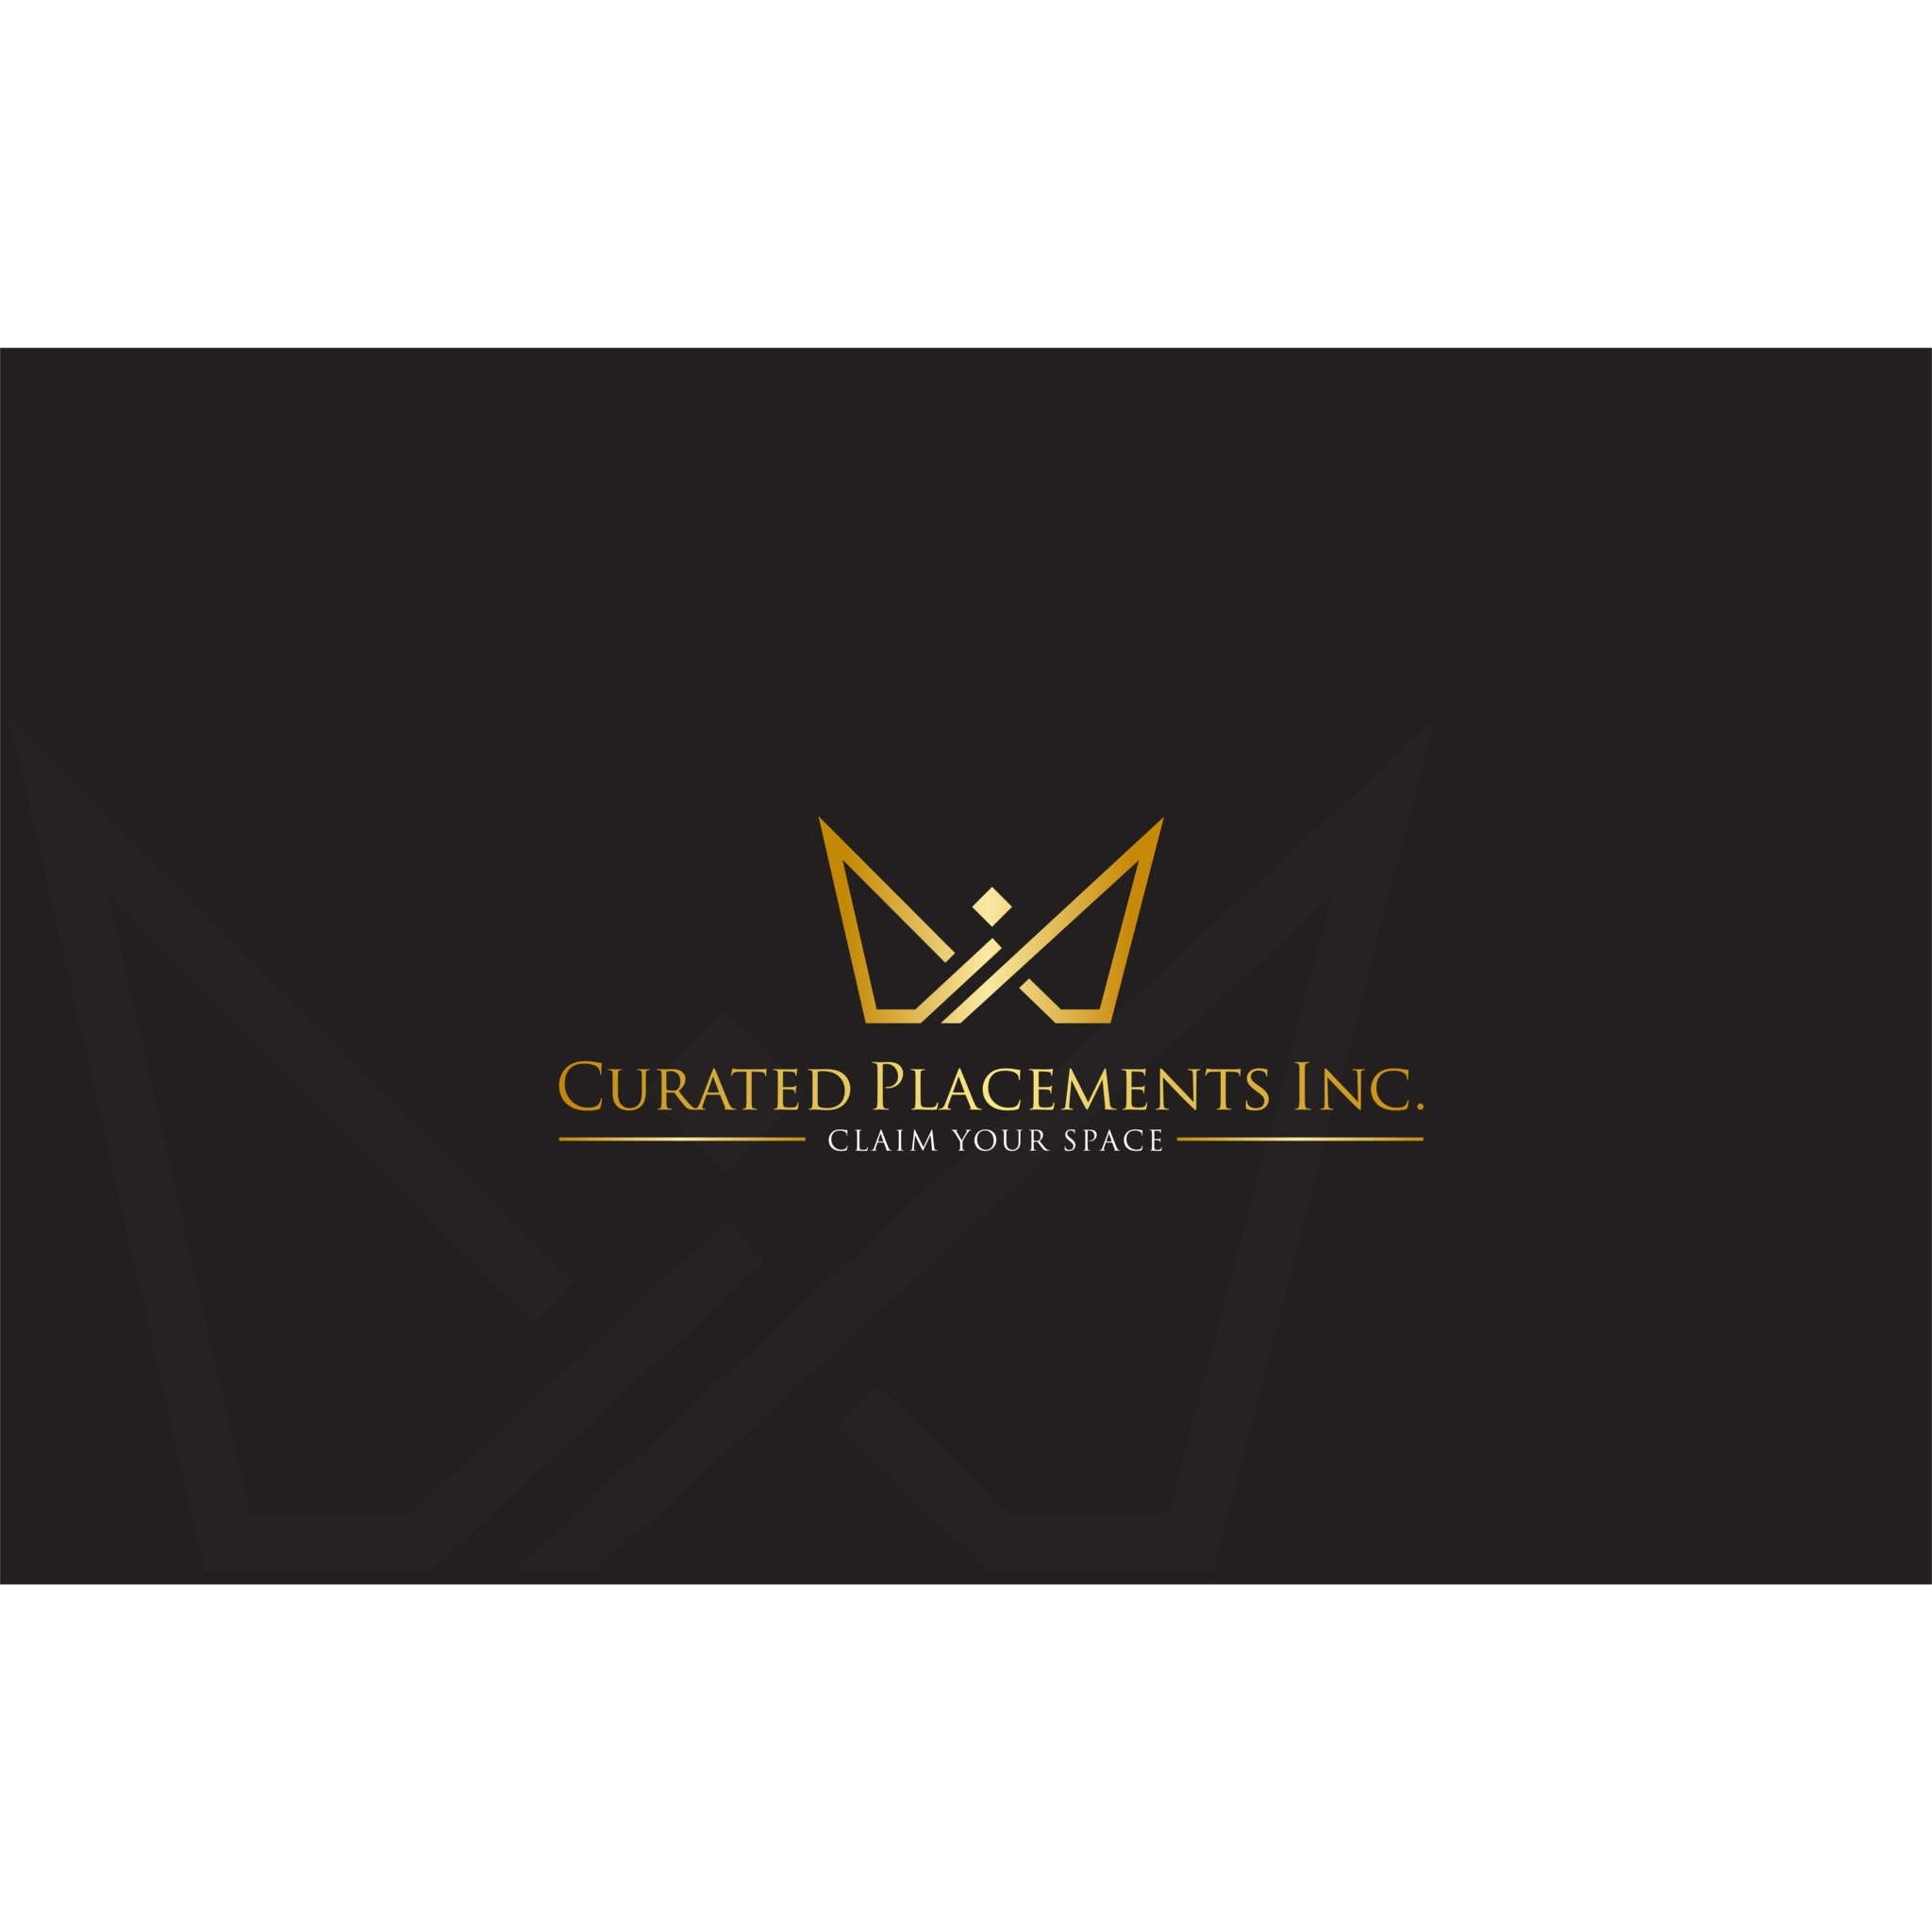 Curated Placements Inc. - Internet Consultants